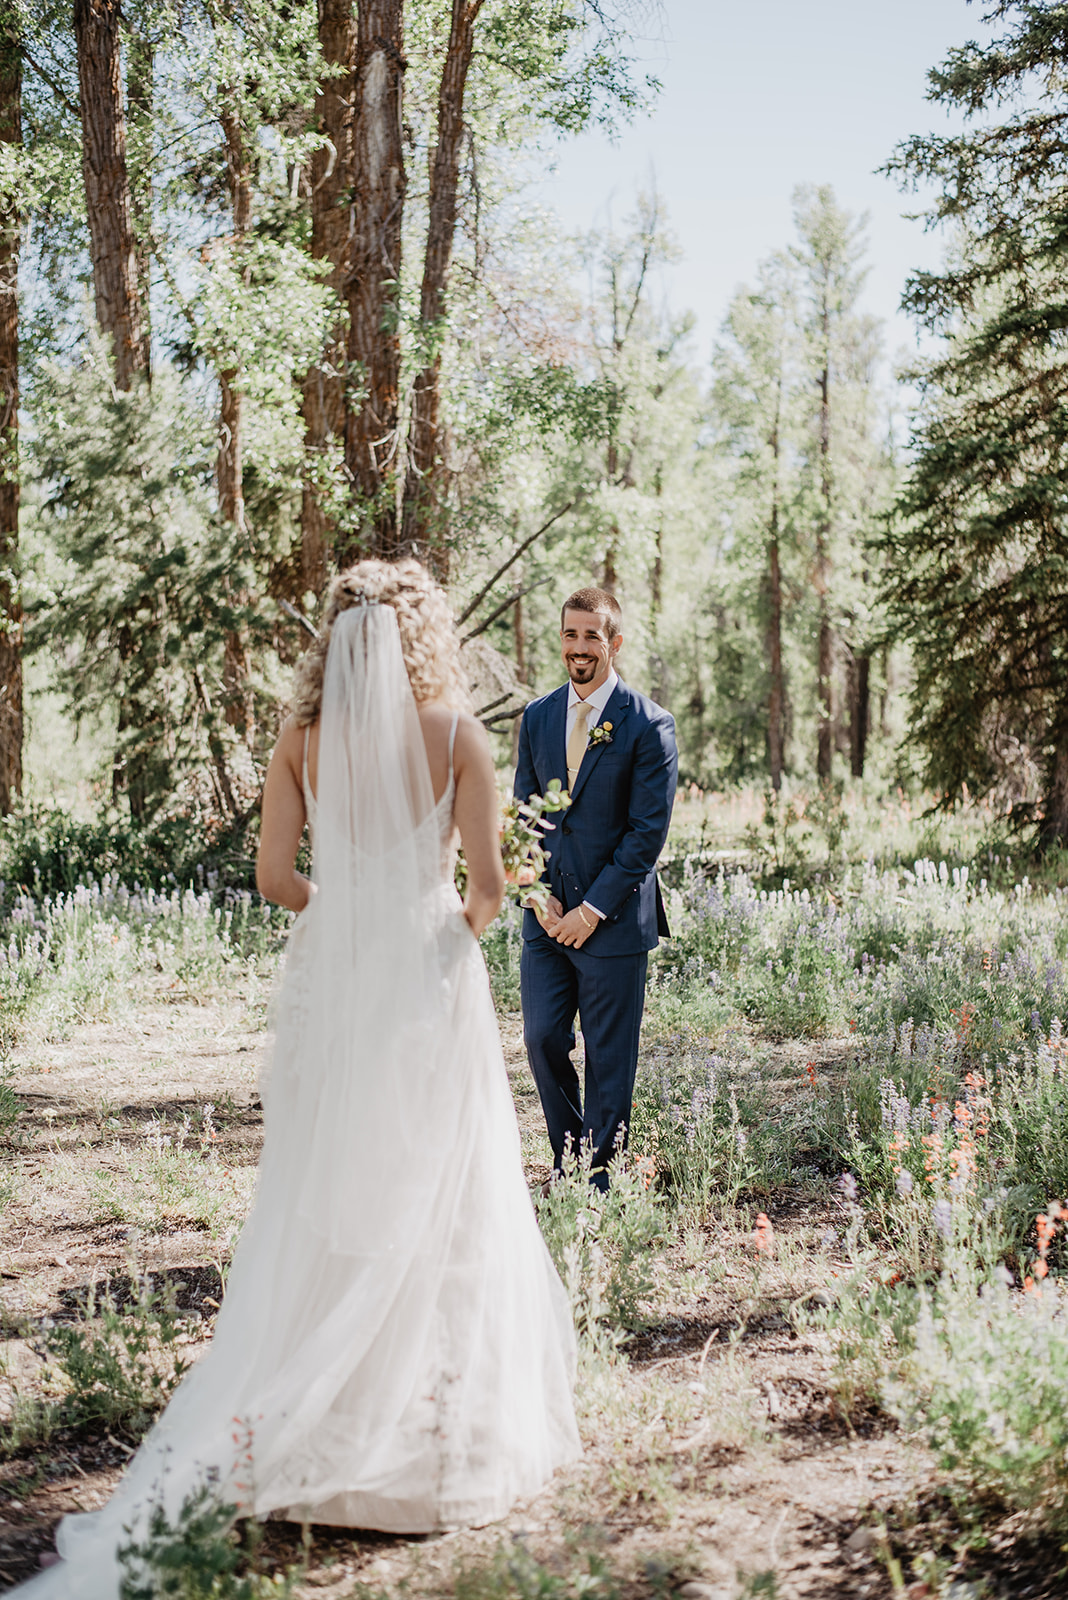 groom seeing his bride in her lace wedding dress in the woods of Jackson Hole for their elopement, captured by the best Jackson Hole wedding photographer